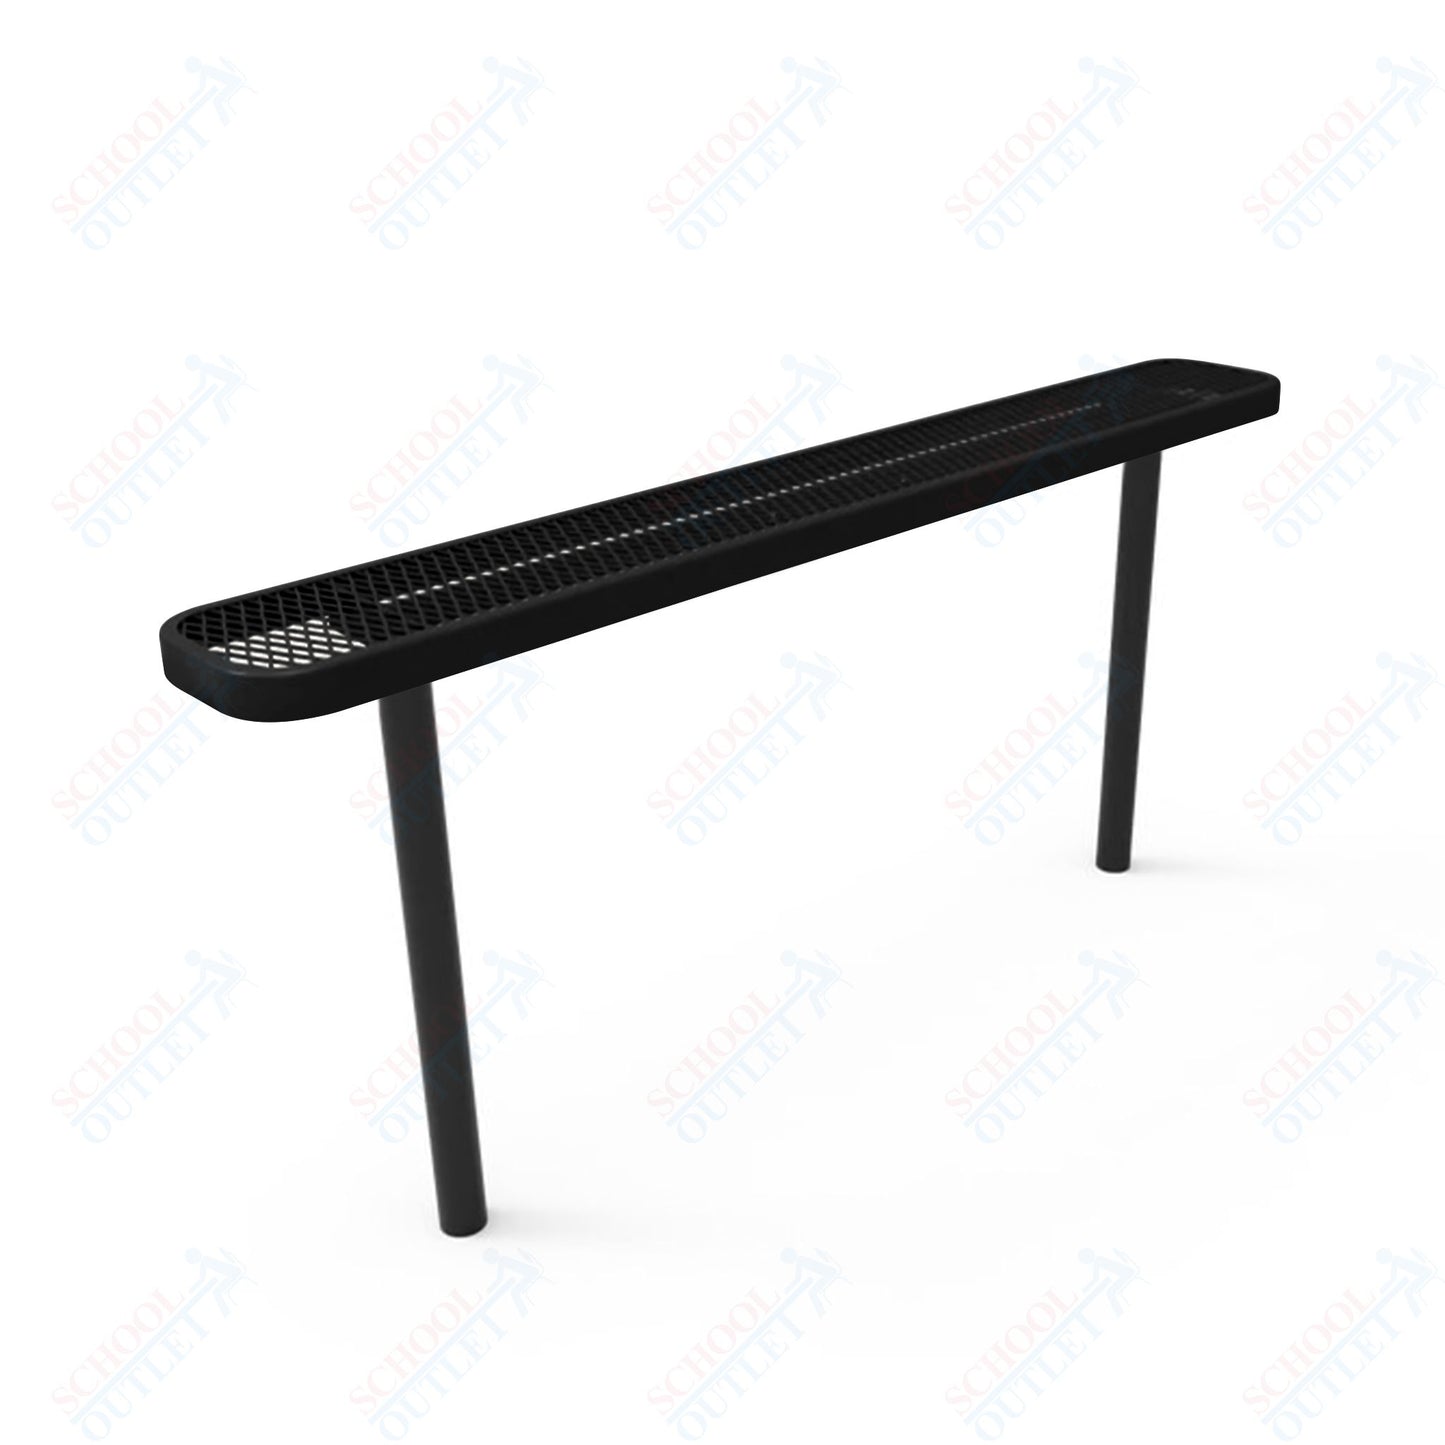 MyTcoat - Standard Outdoor Bench with Back - Inground Mount 4' L (MYT-BRT04-22)